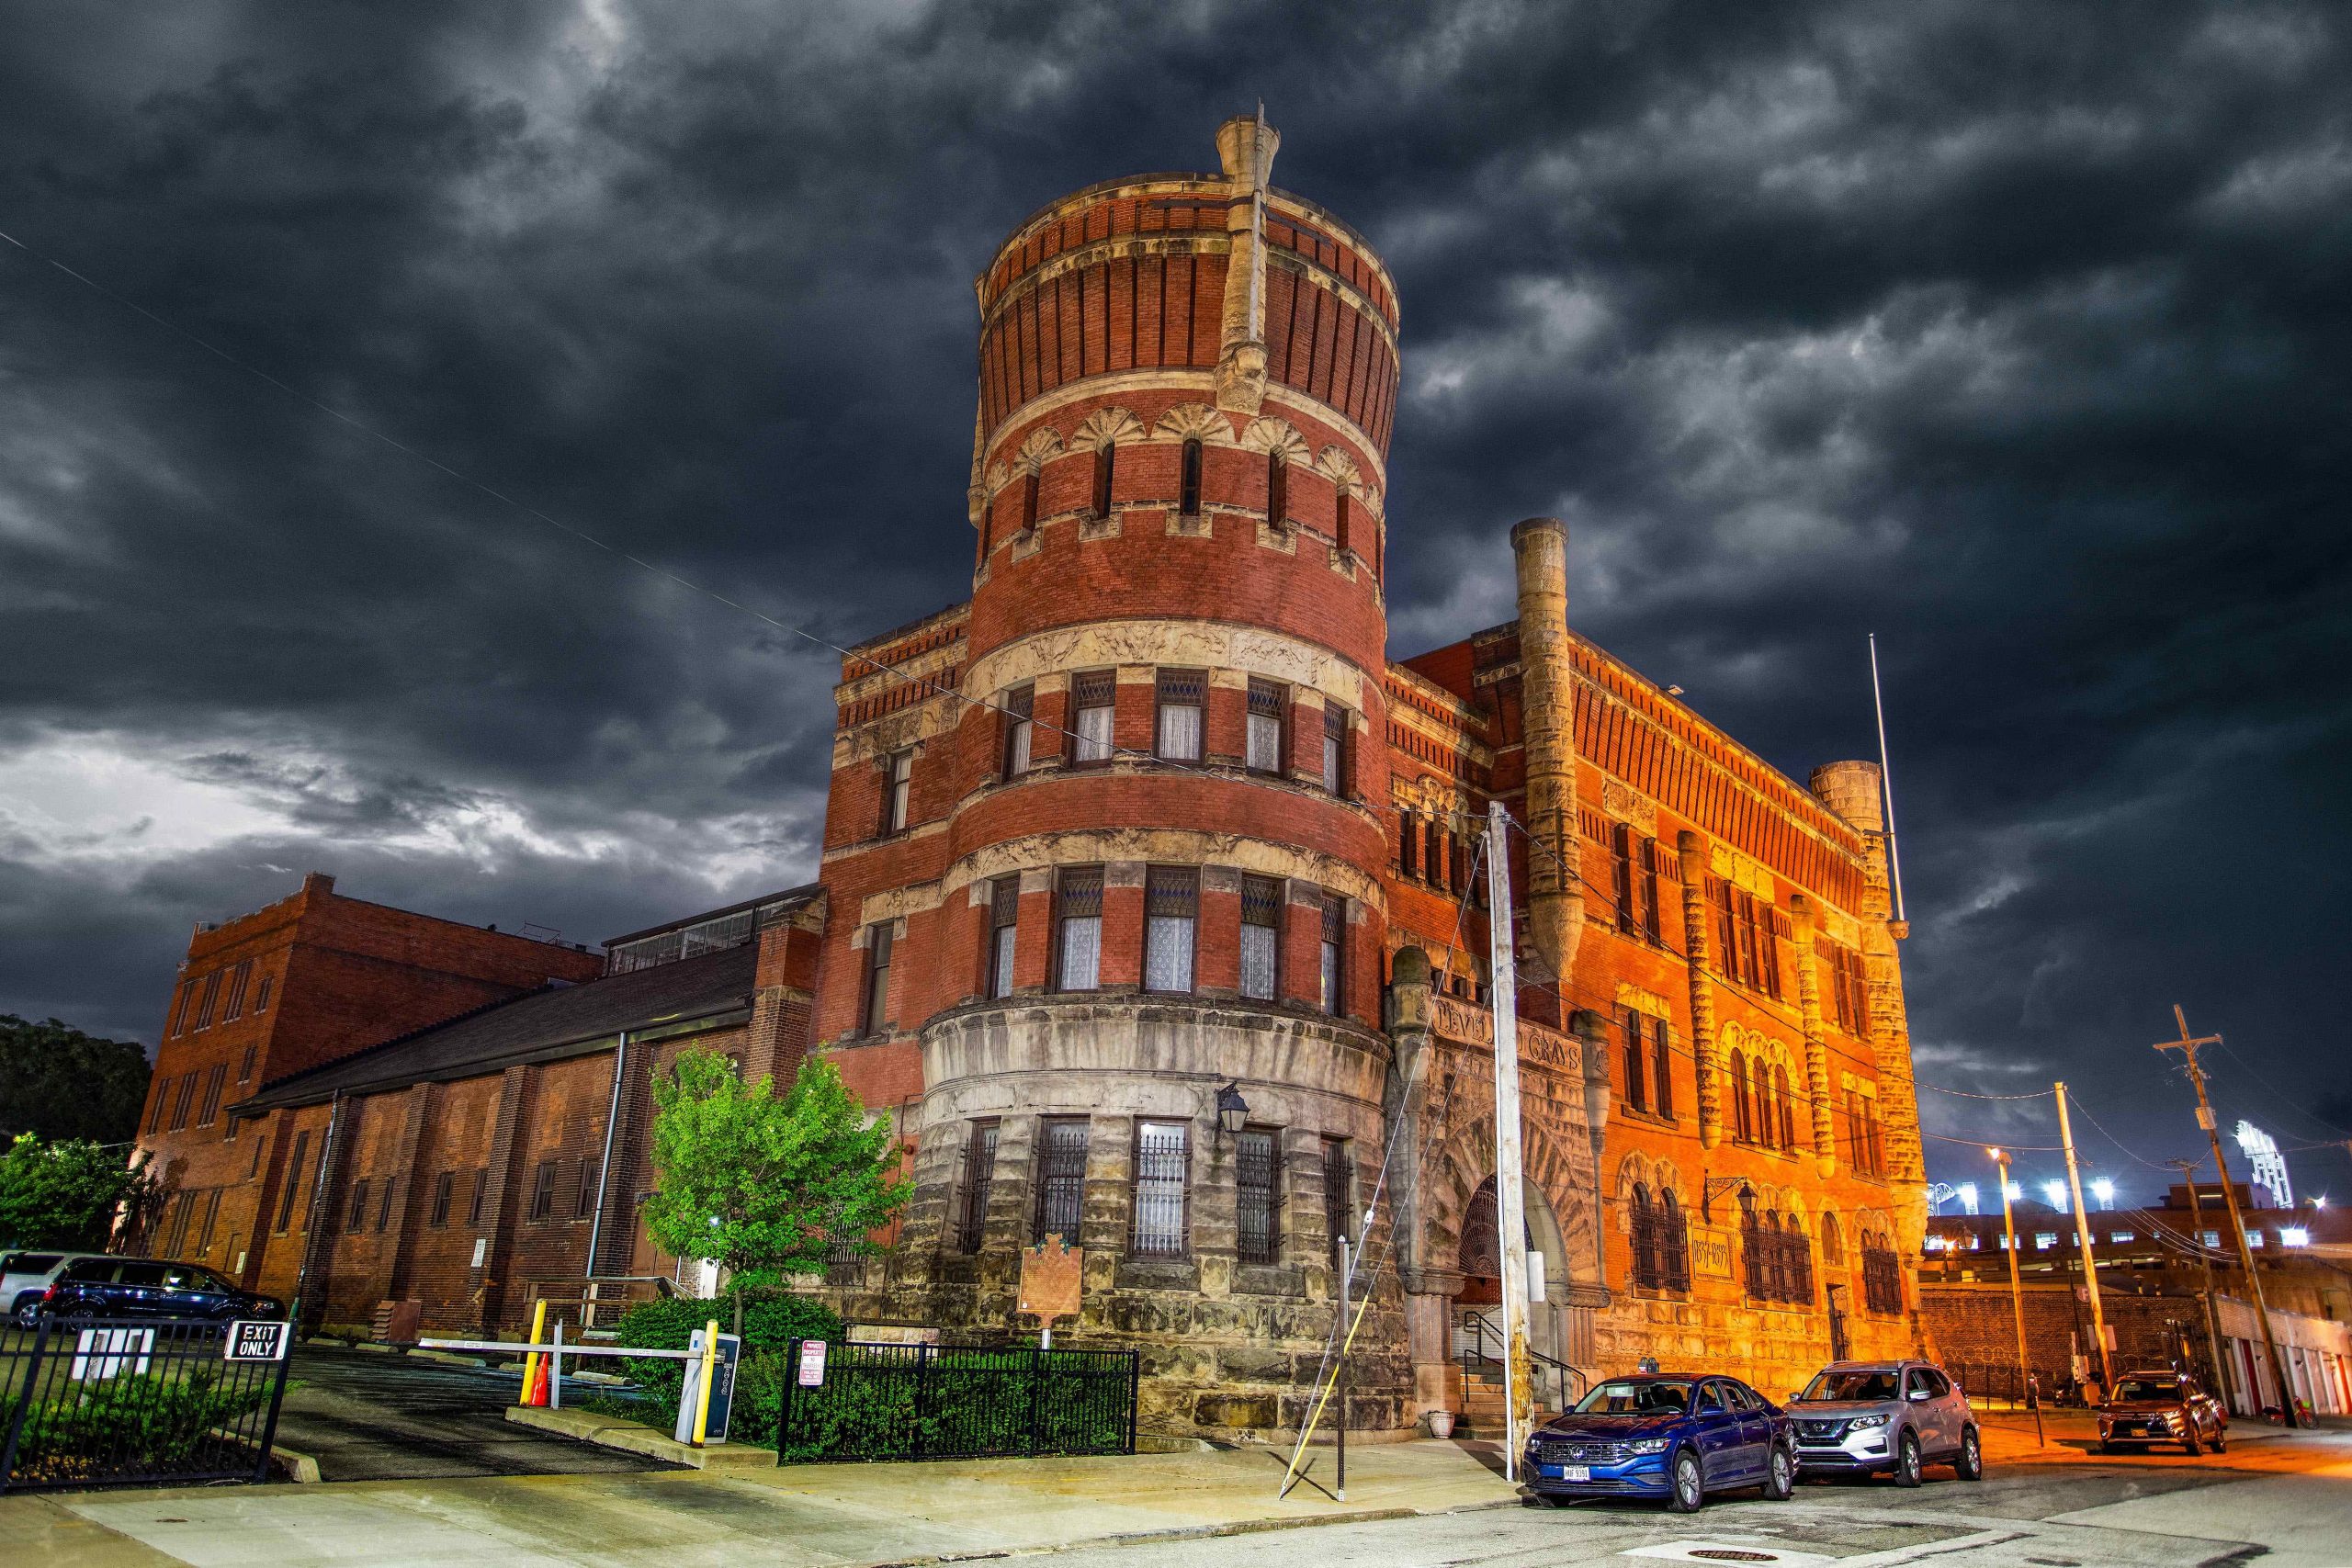 The Cleveland Grays Armory Museum